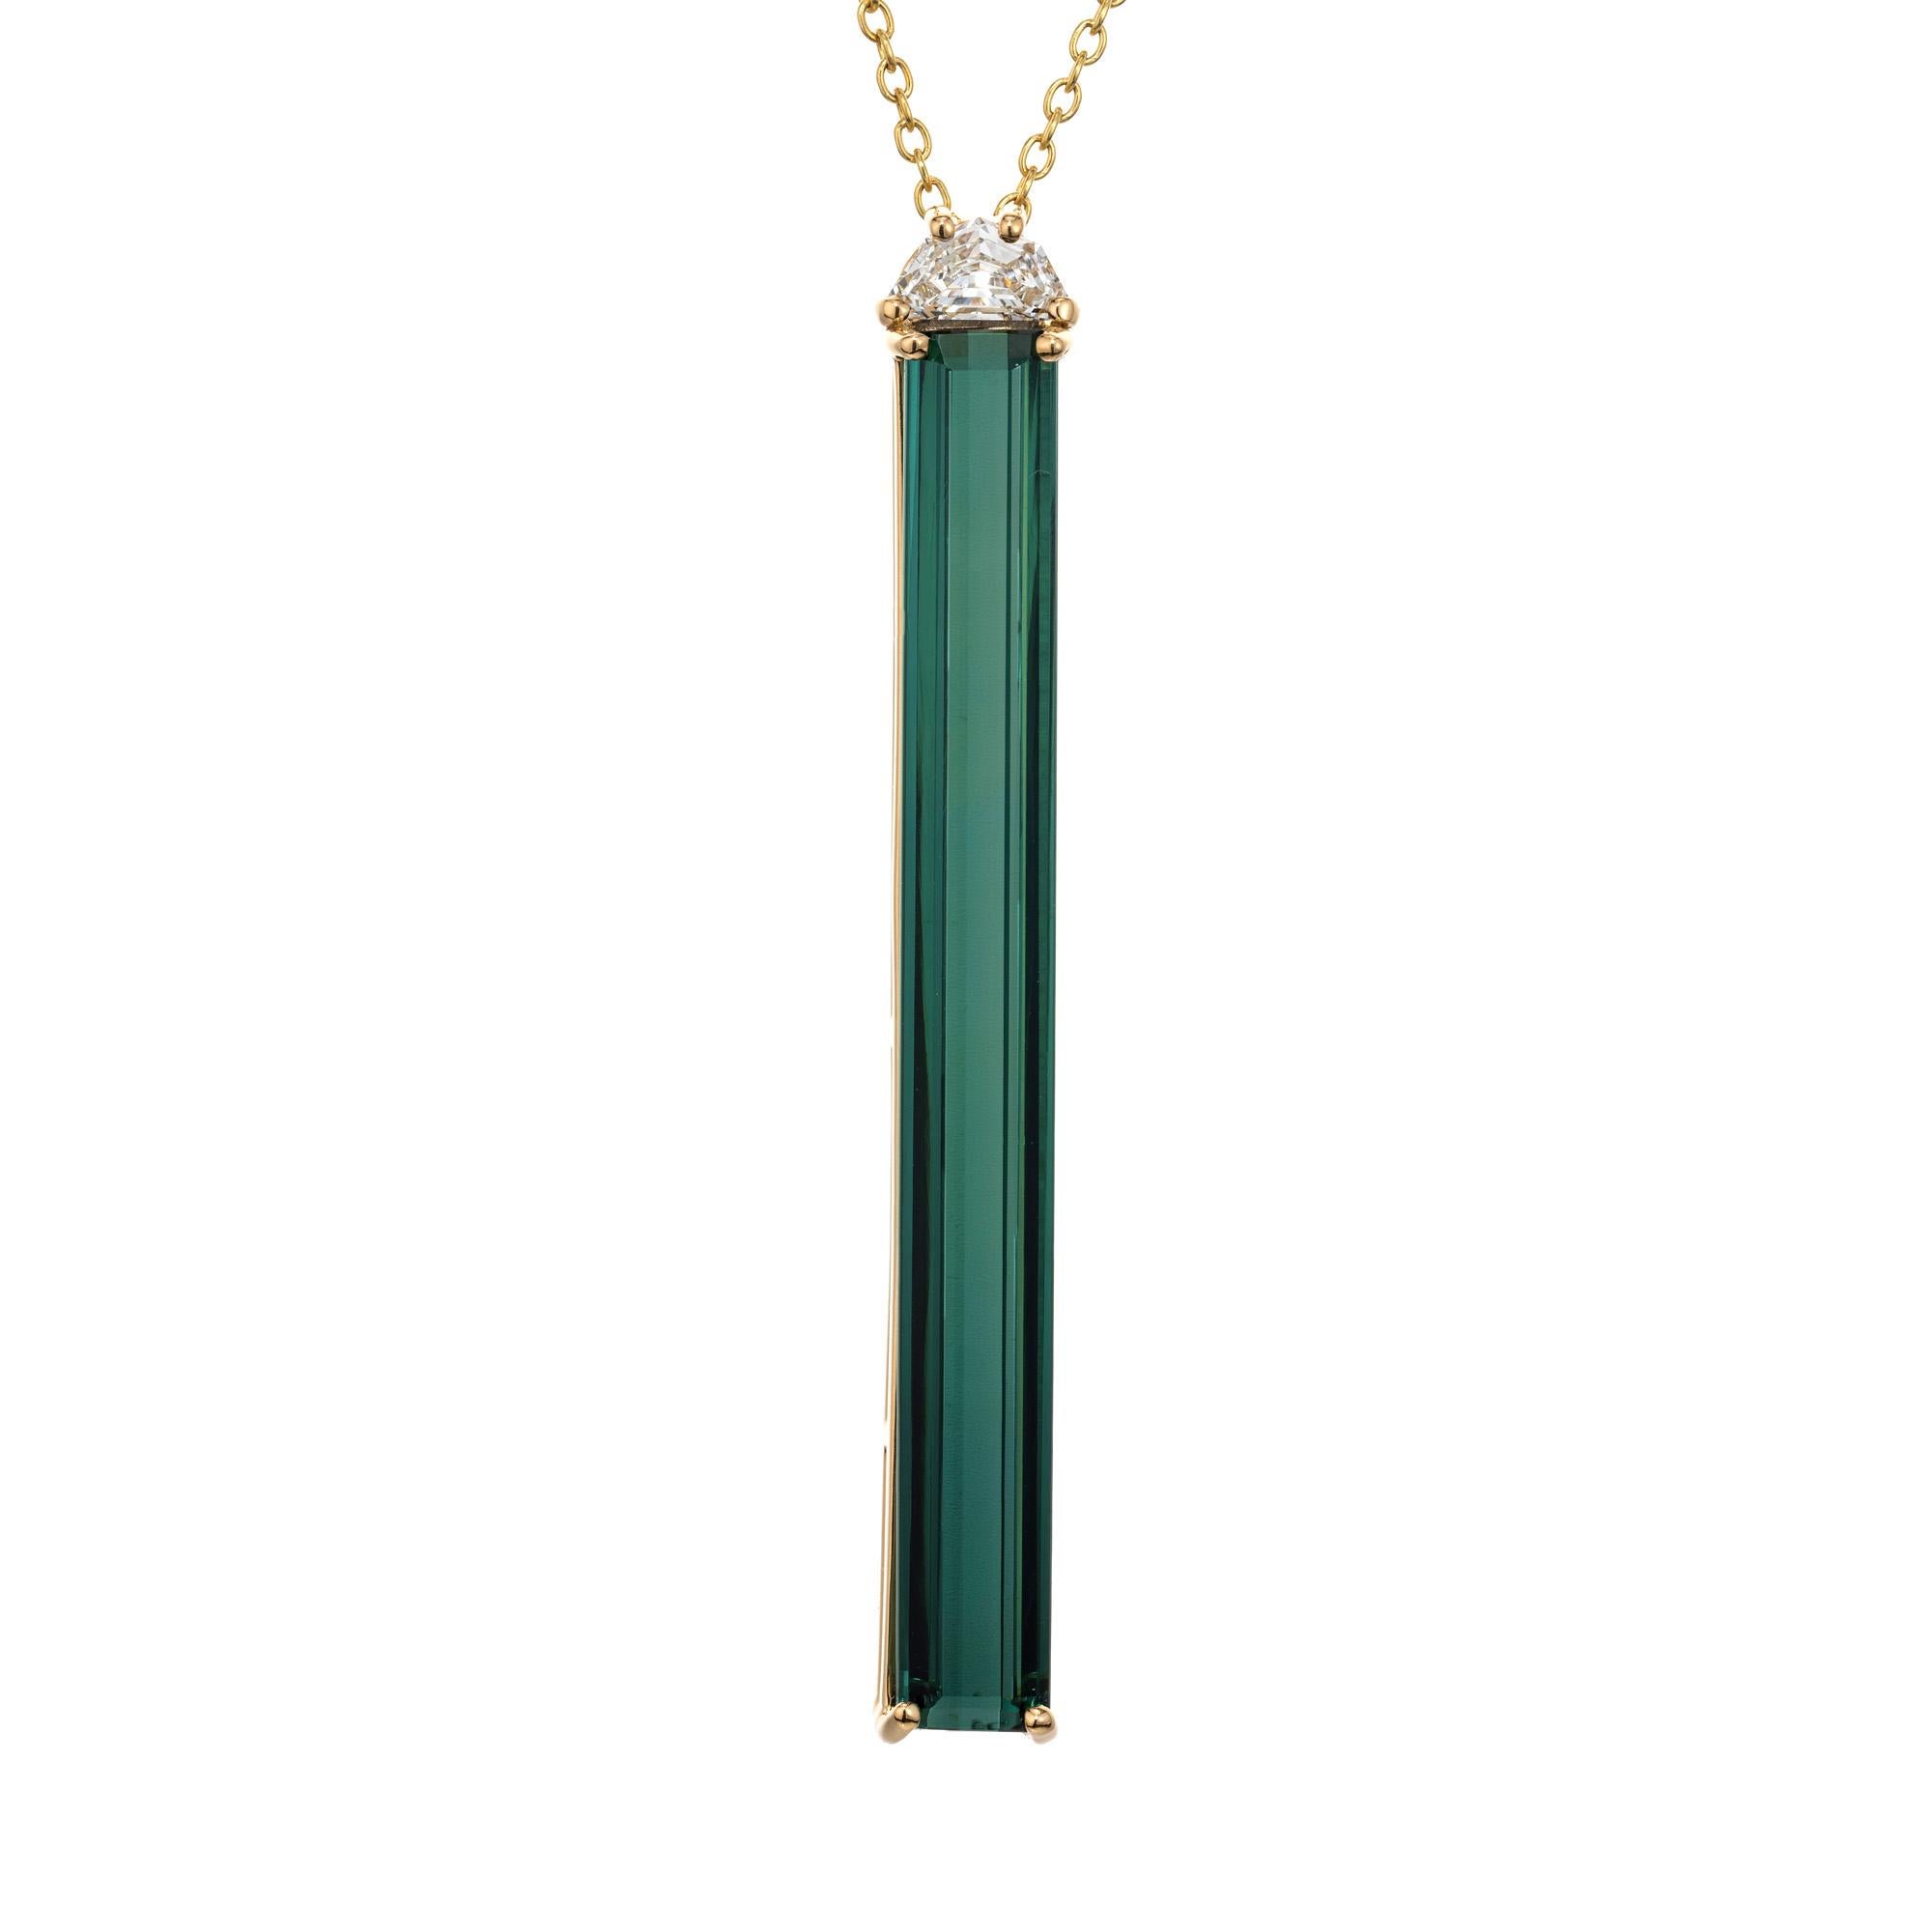 This unique and rare Tourmaline and diamond pendant necklace comes from the Peter Suchy Workshop. 6.50 carat elongated emerald cut deep green tourmaline is set in four prong 18k yellow gold setting. A half moon accent diamond sits atop of the